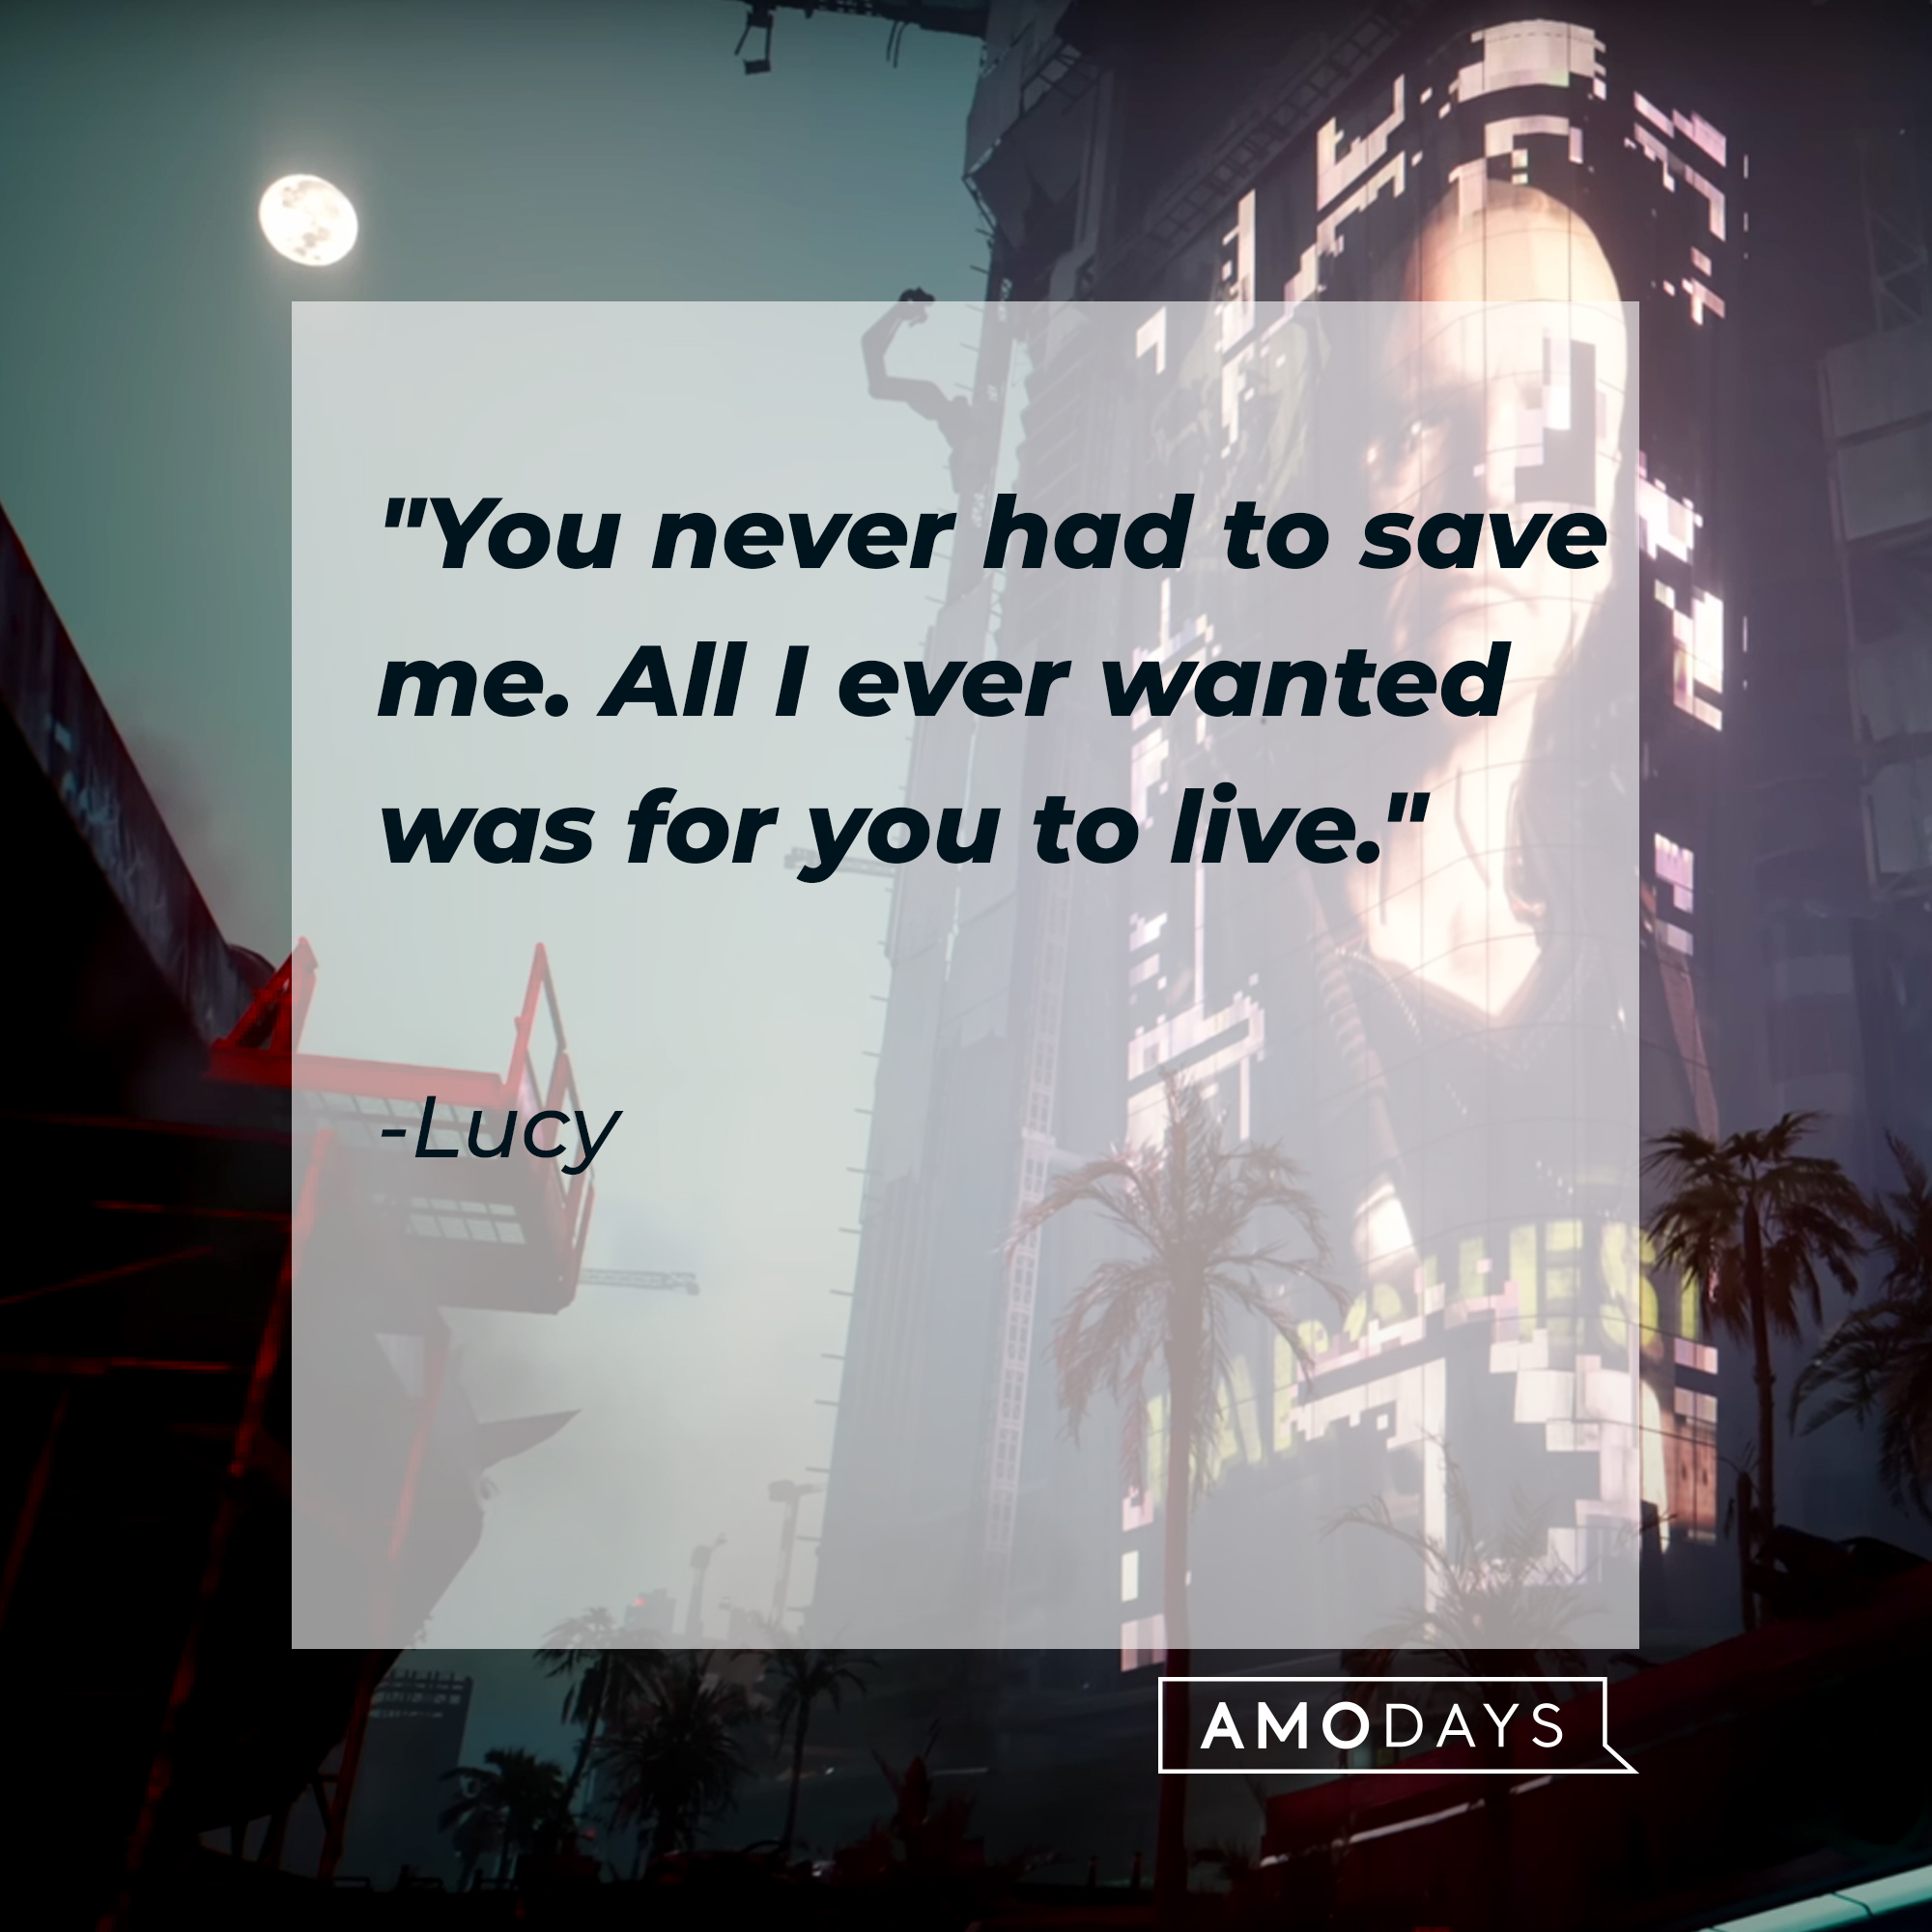 Lucy’s quote: "You never had to save me. All I ever wanted was for you to live." | Source:  Youtube.com/CyberpunkGame